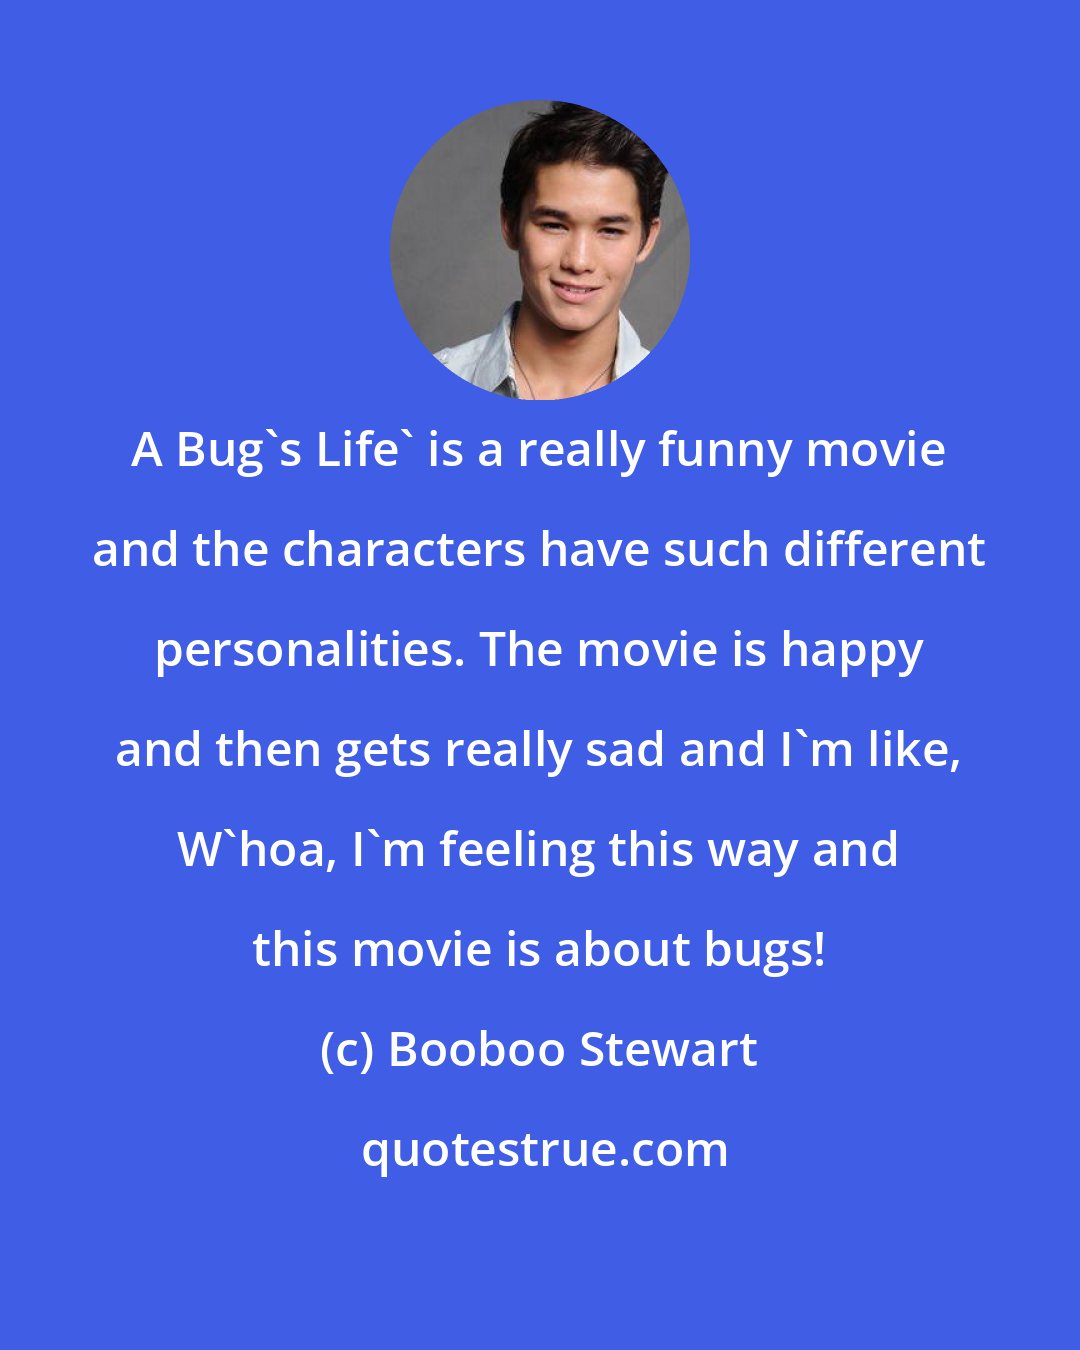 Booboo Stewart: A Bug's Life' is a really funny movie and the characters have such different personalities. The movie is happy and then gets really sad and I'm like, W'hoa, I'm feeling this way and this movie is about bugs!